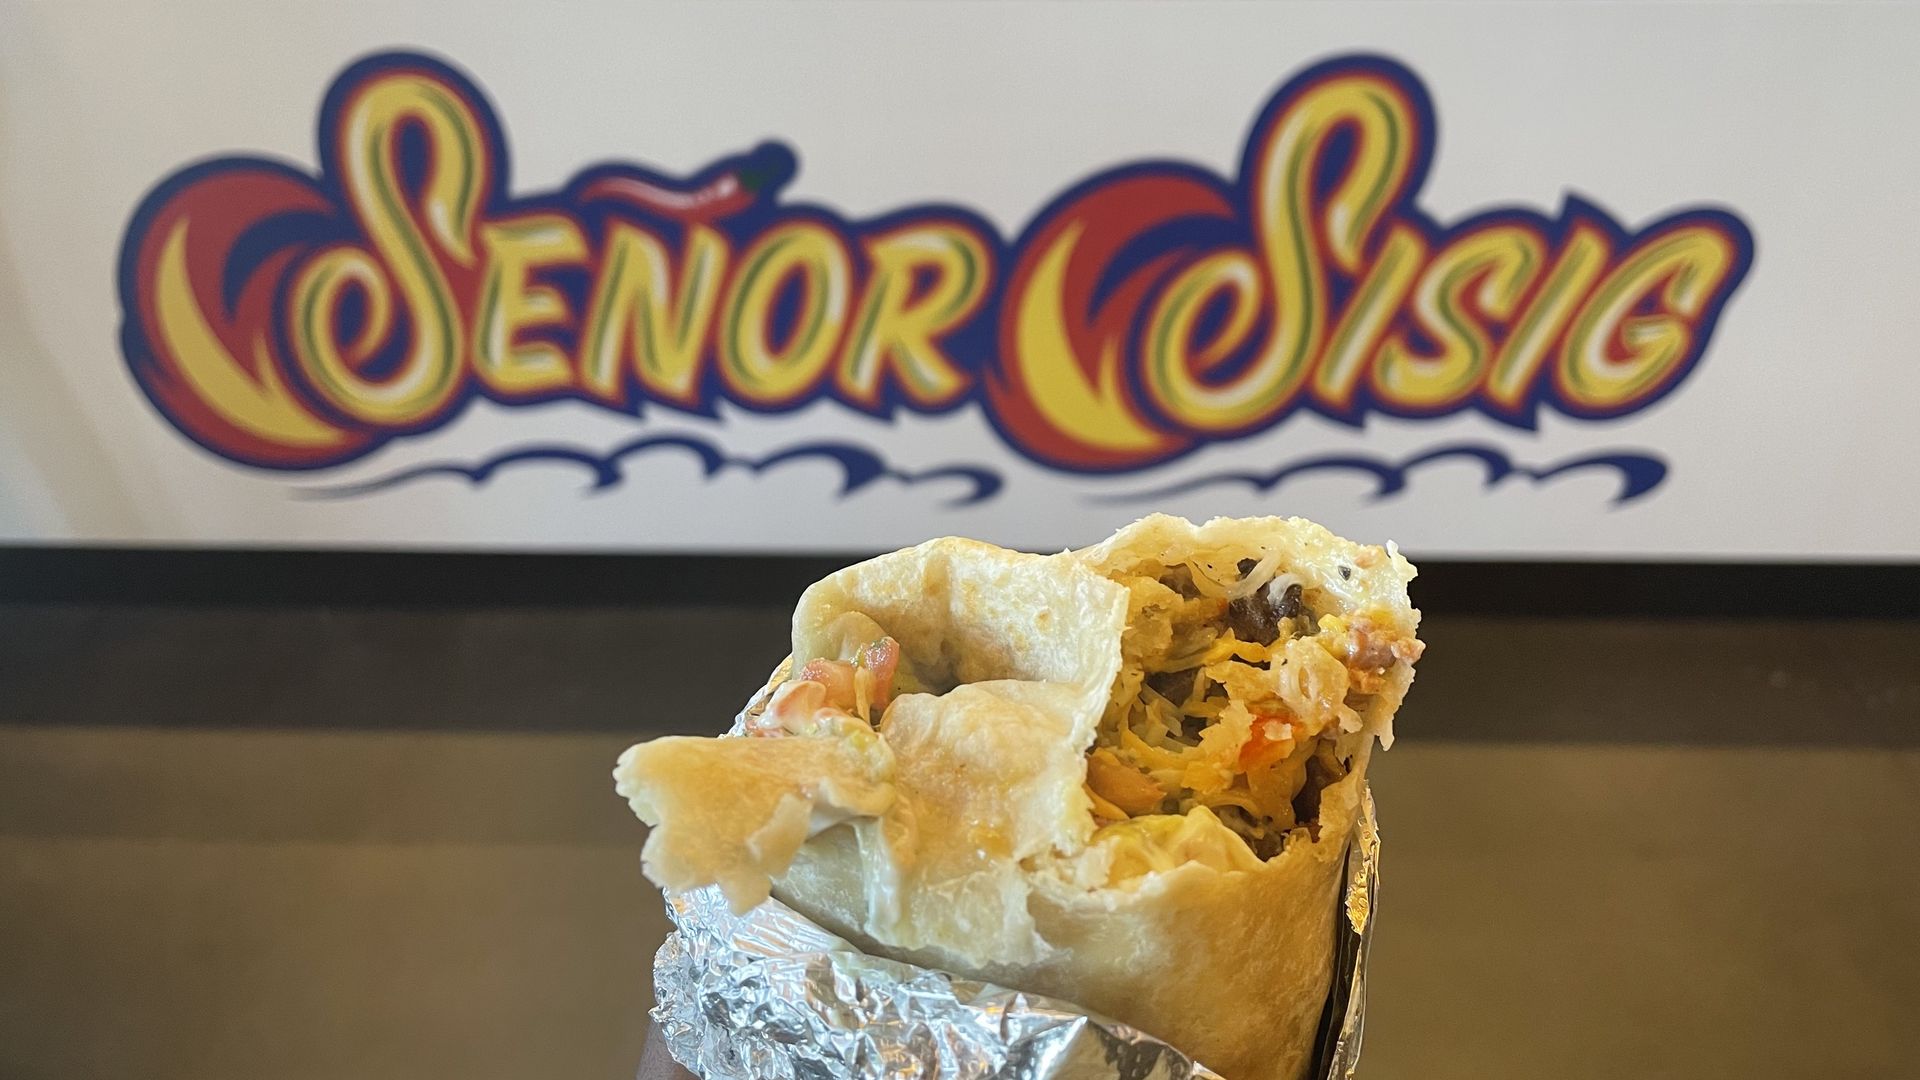 a burrito with a bite taken out of it in front of a sign that says "senor sisig"